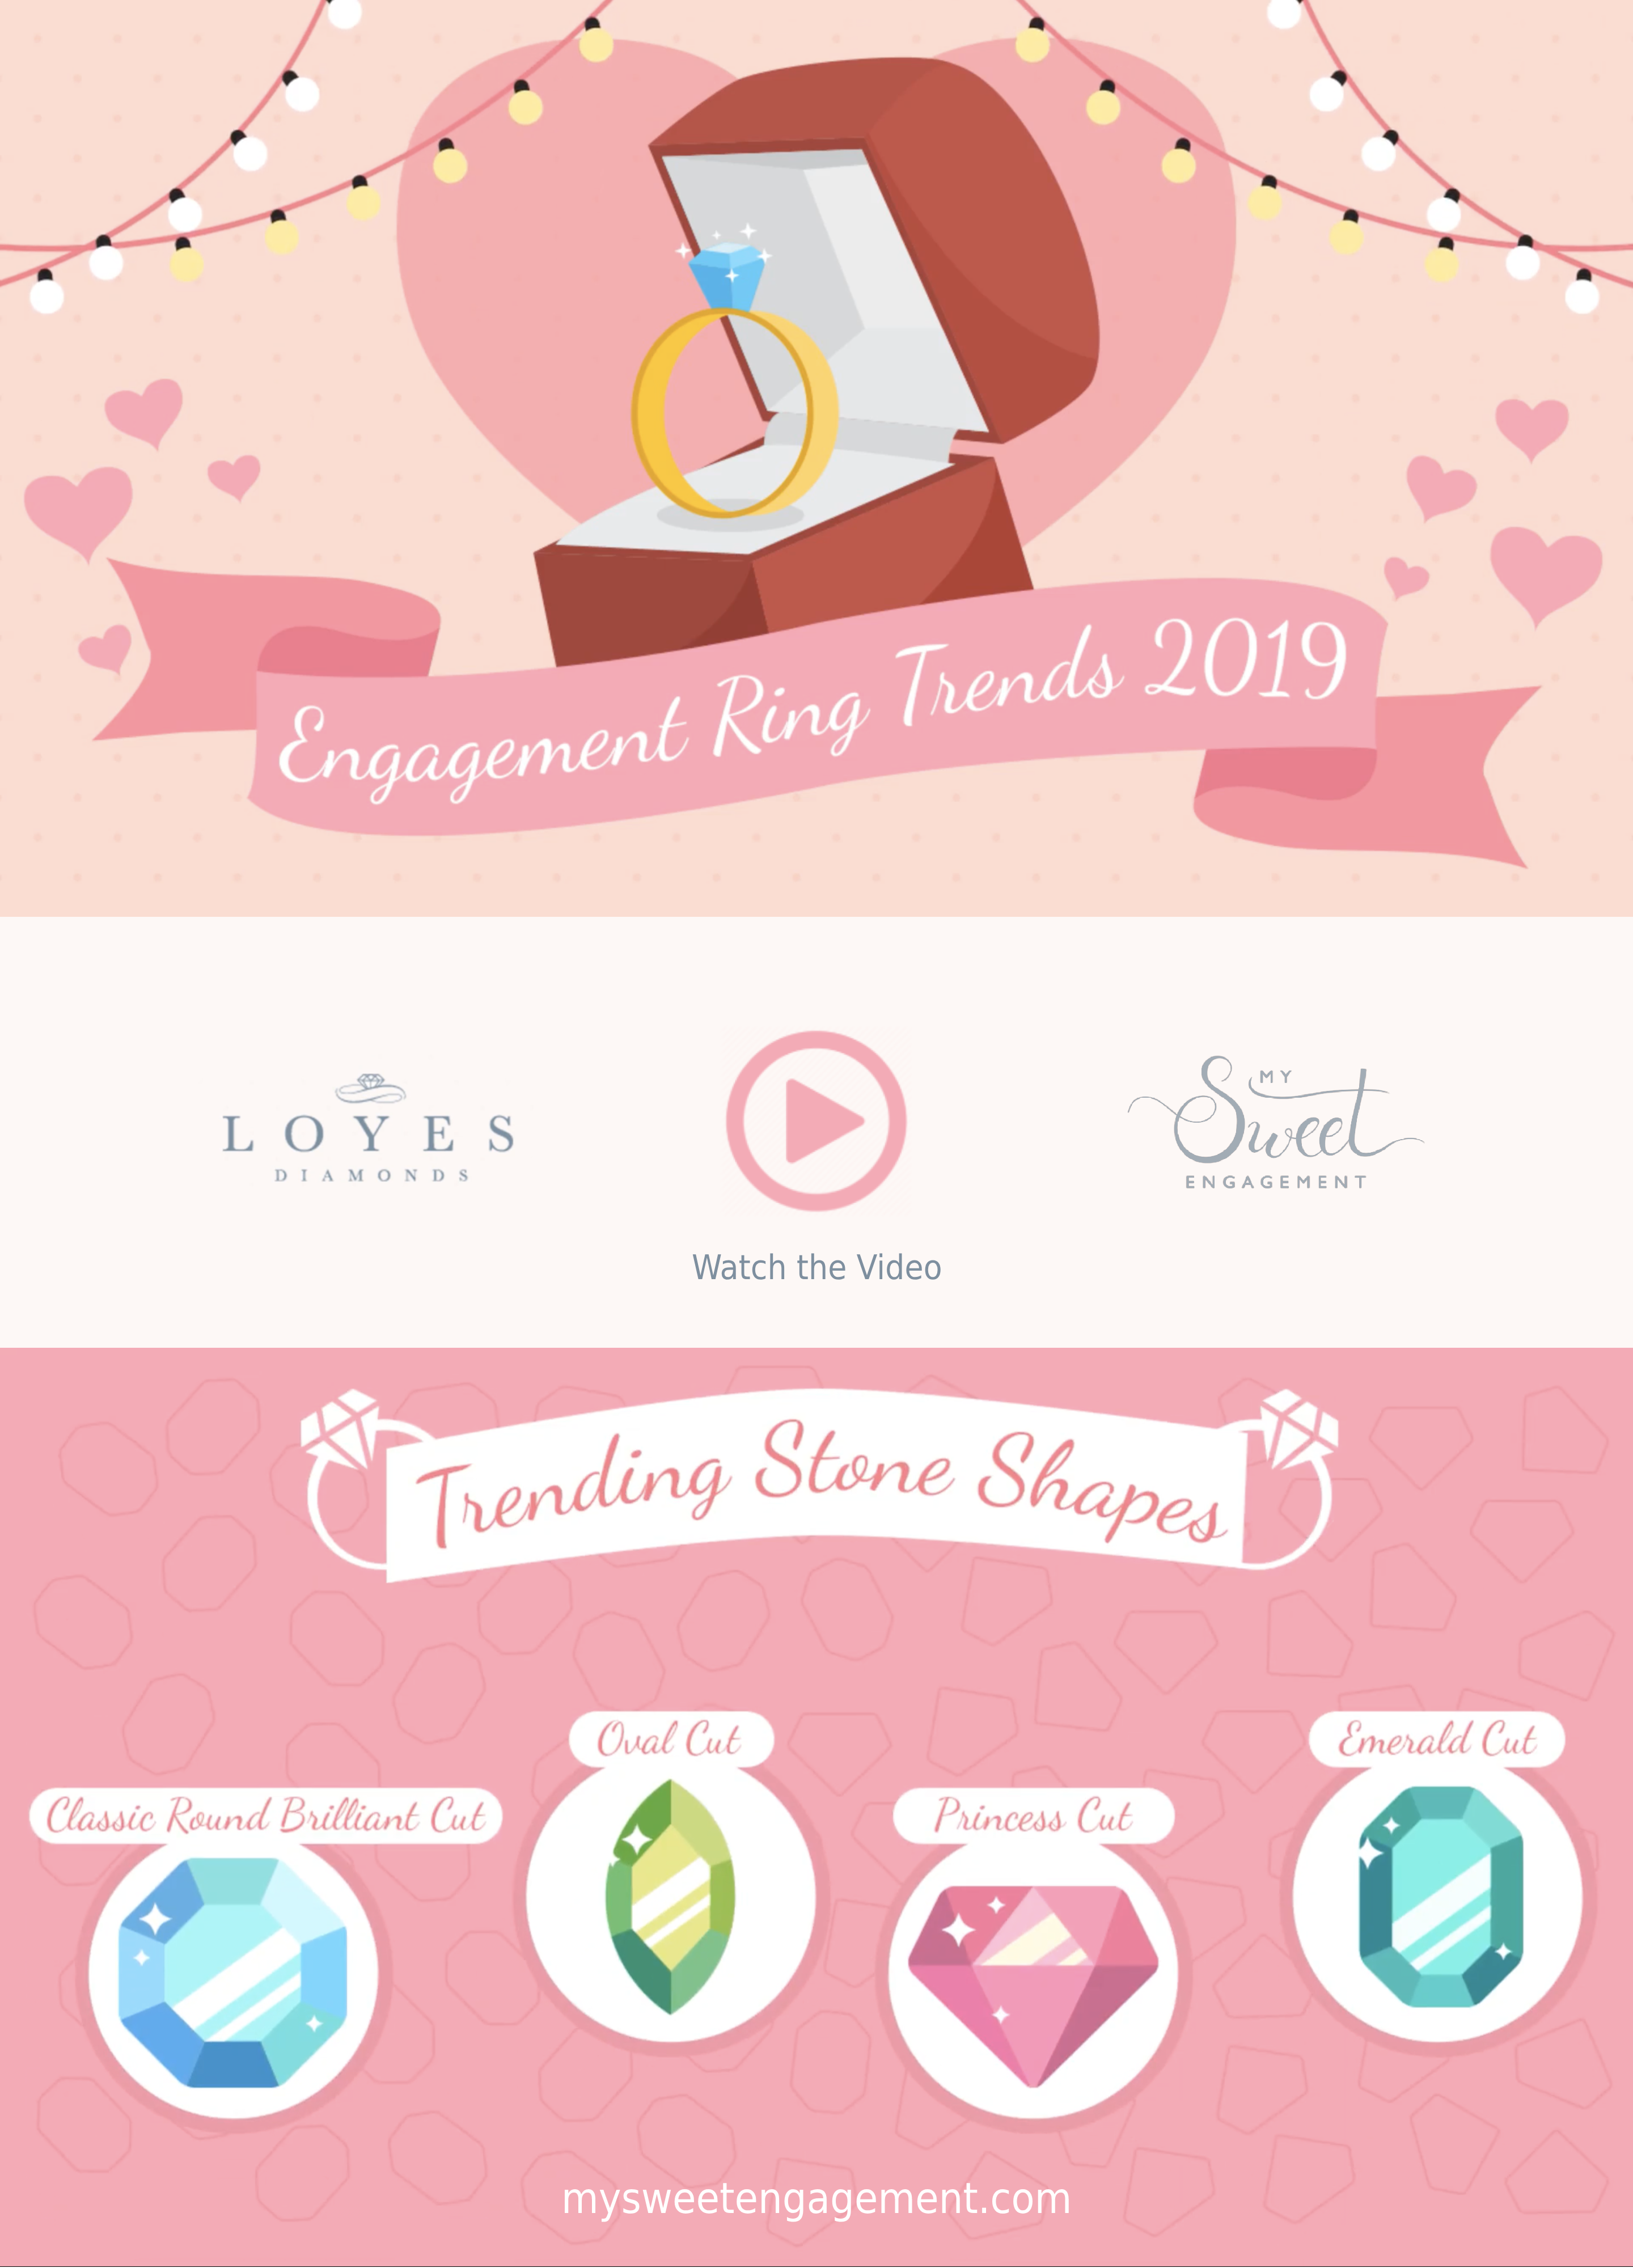 Watch this 2 min awesome Engagement Ring Trends Guide Video to better understand how to pick the perfect engagement ring for you. // Topics: Trending Stone Shapes, Metal Trends, Ring Gemstones, Ring Customization and more. // Provided by Loyes Diamonds // mysweetengagement.com